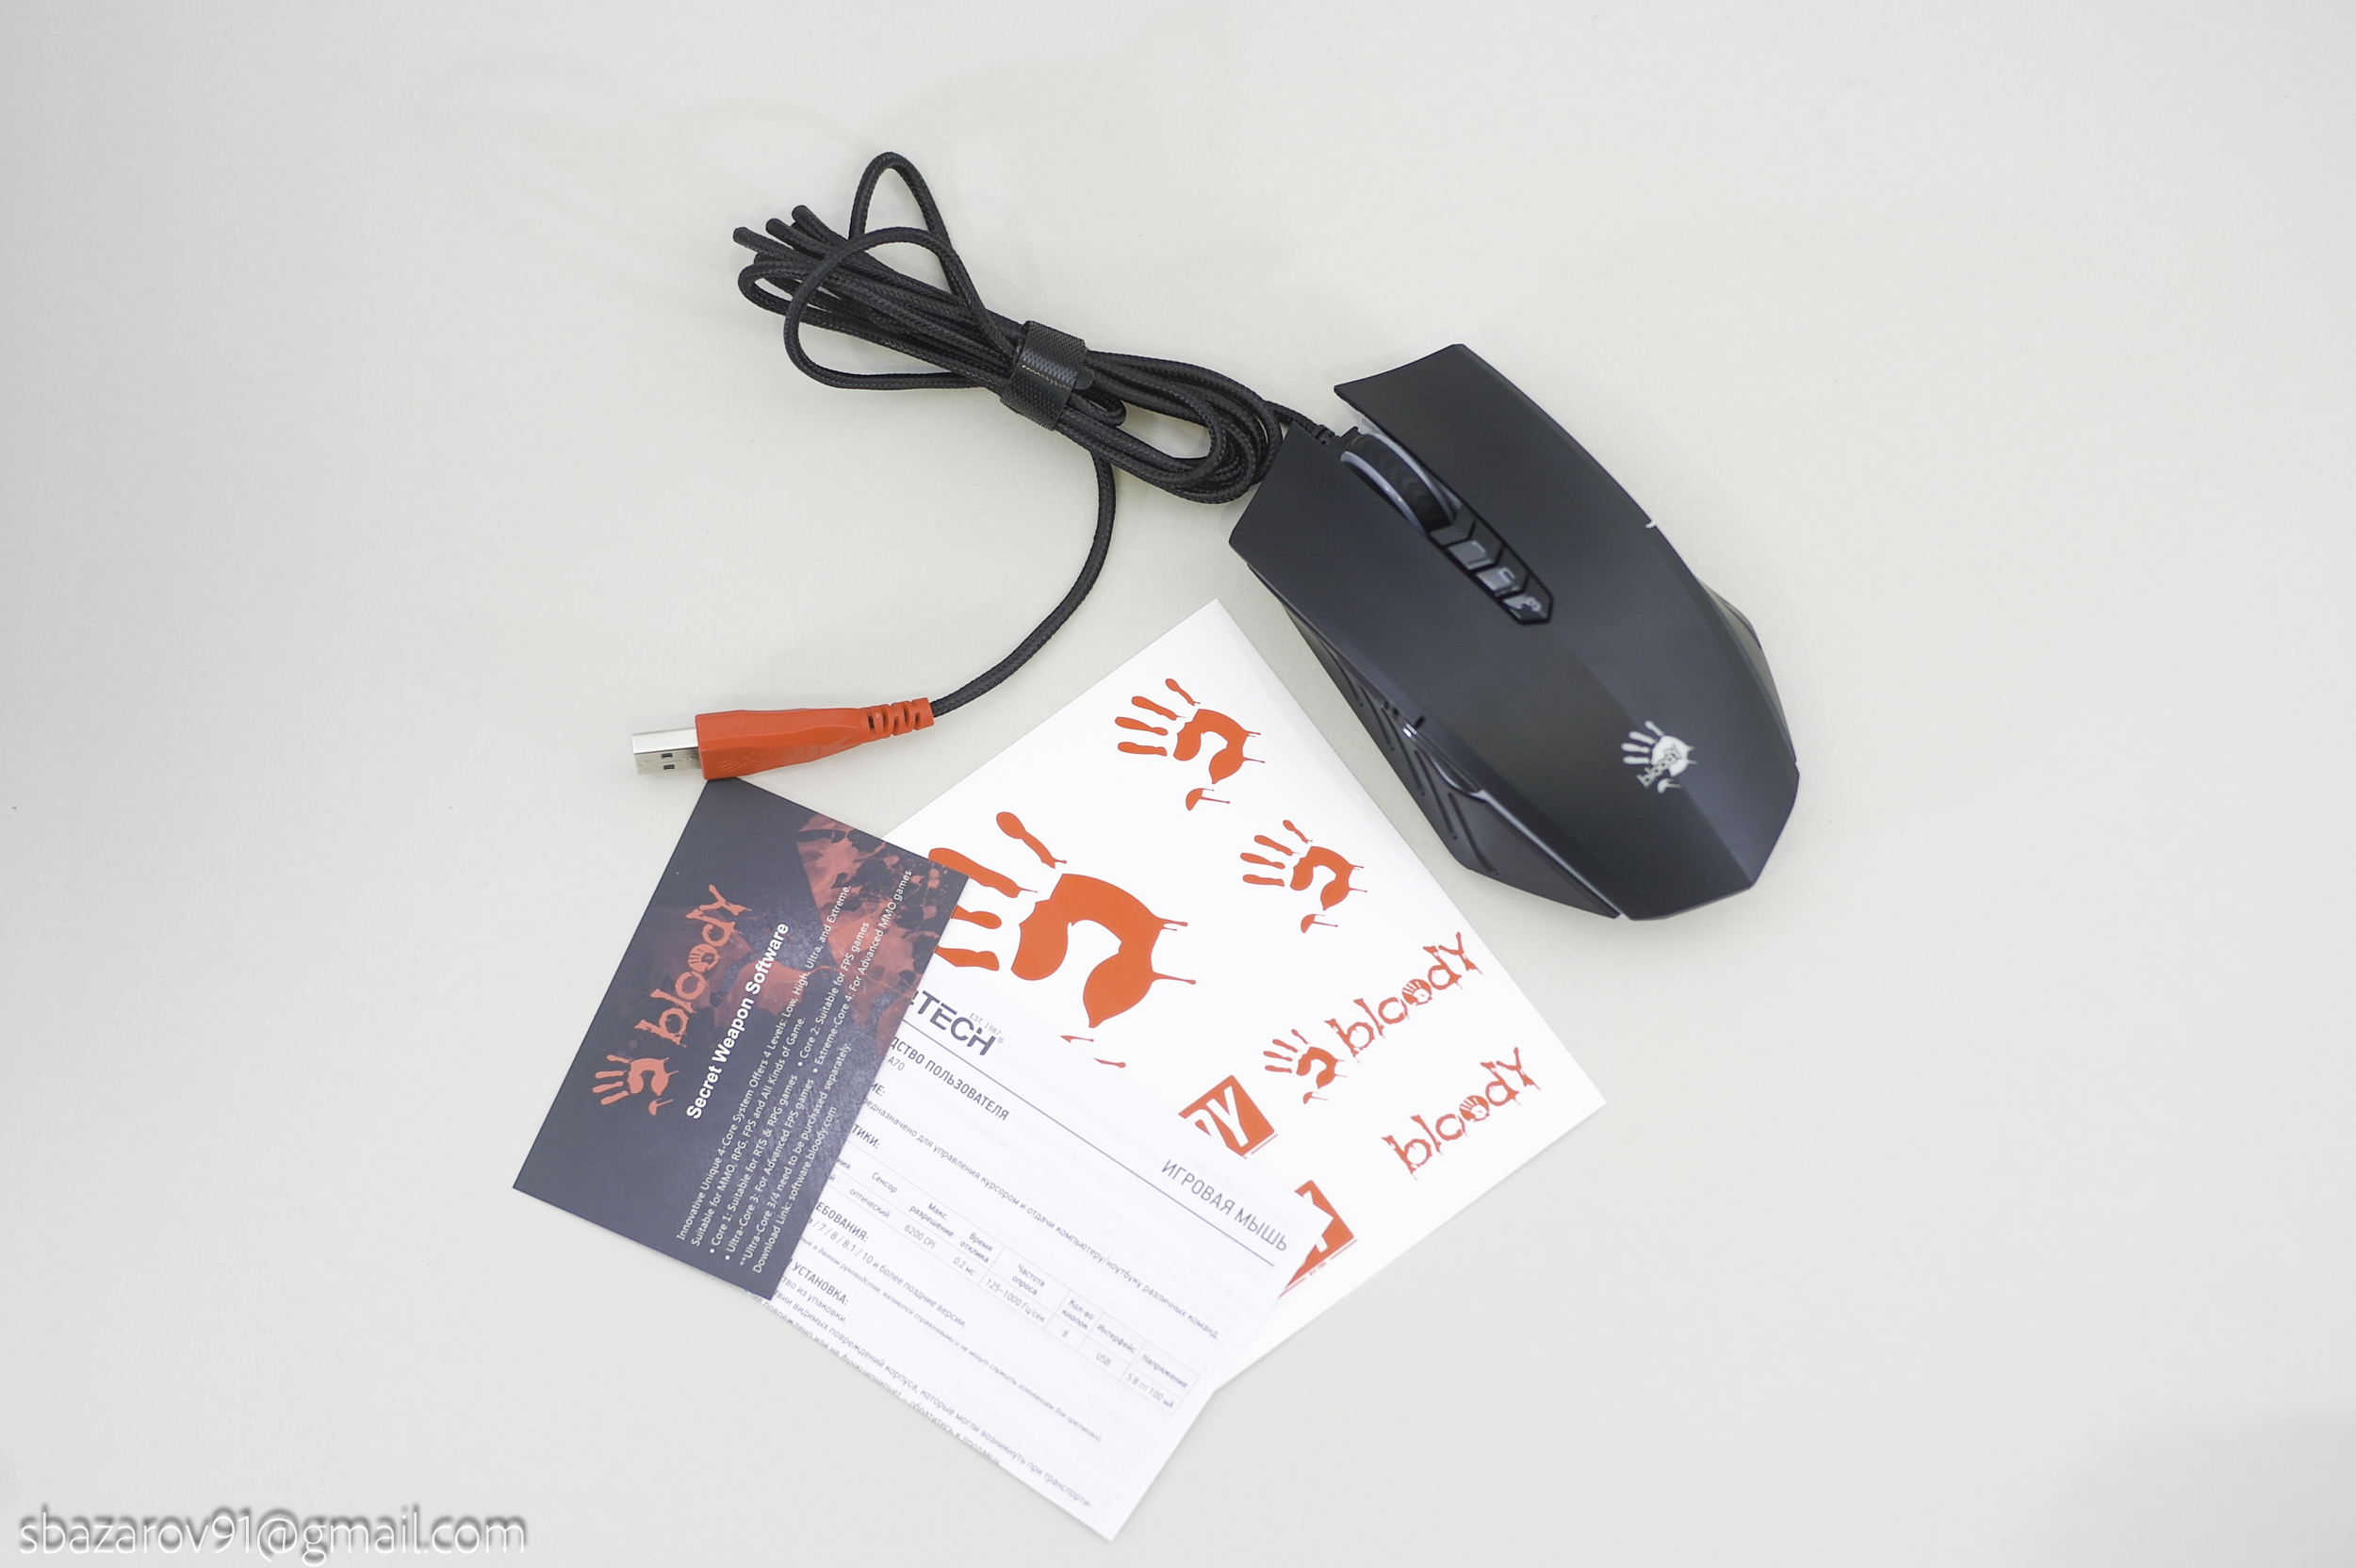 Bloody a70 Drag click sotib olish. Blacklisted device bloody mouse